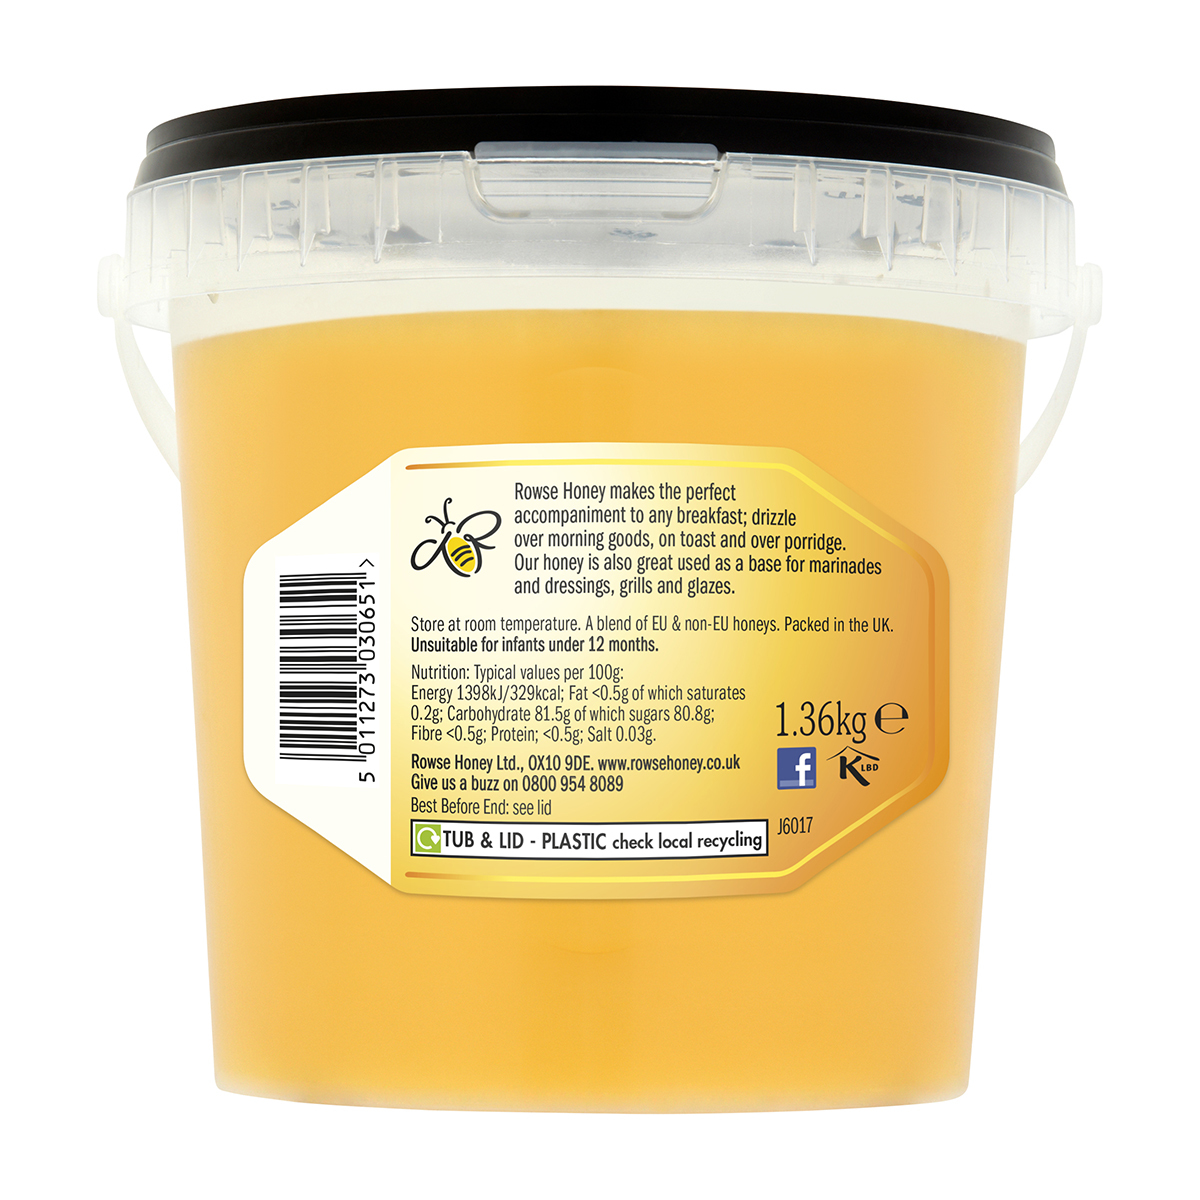 Rowse Set Honey Nutritional Information